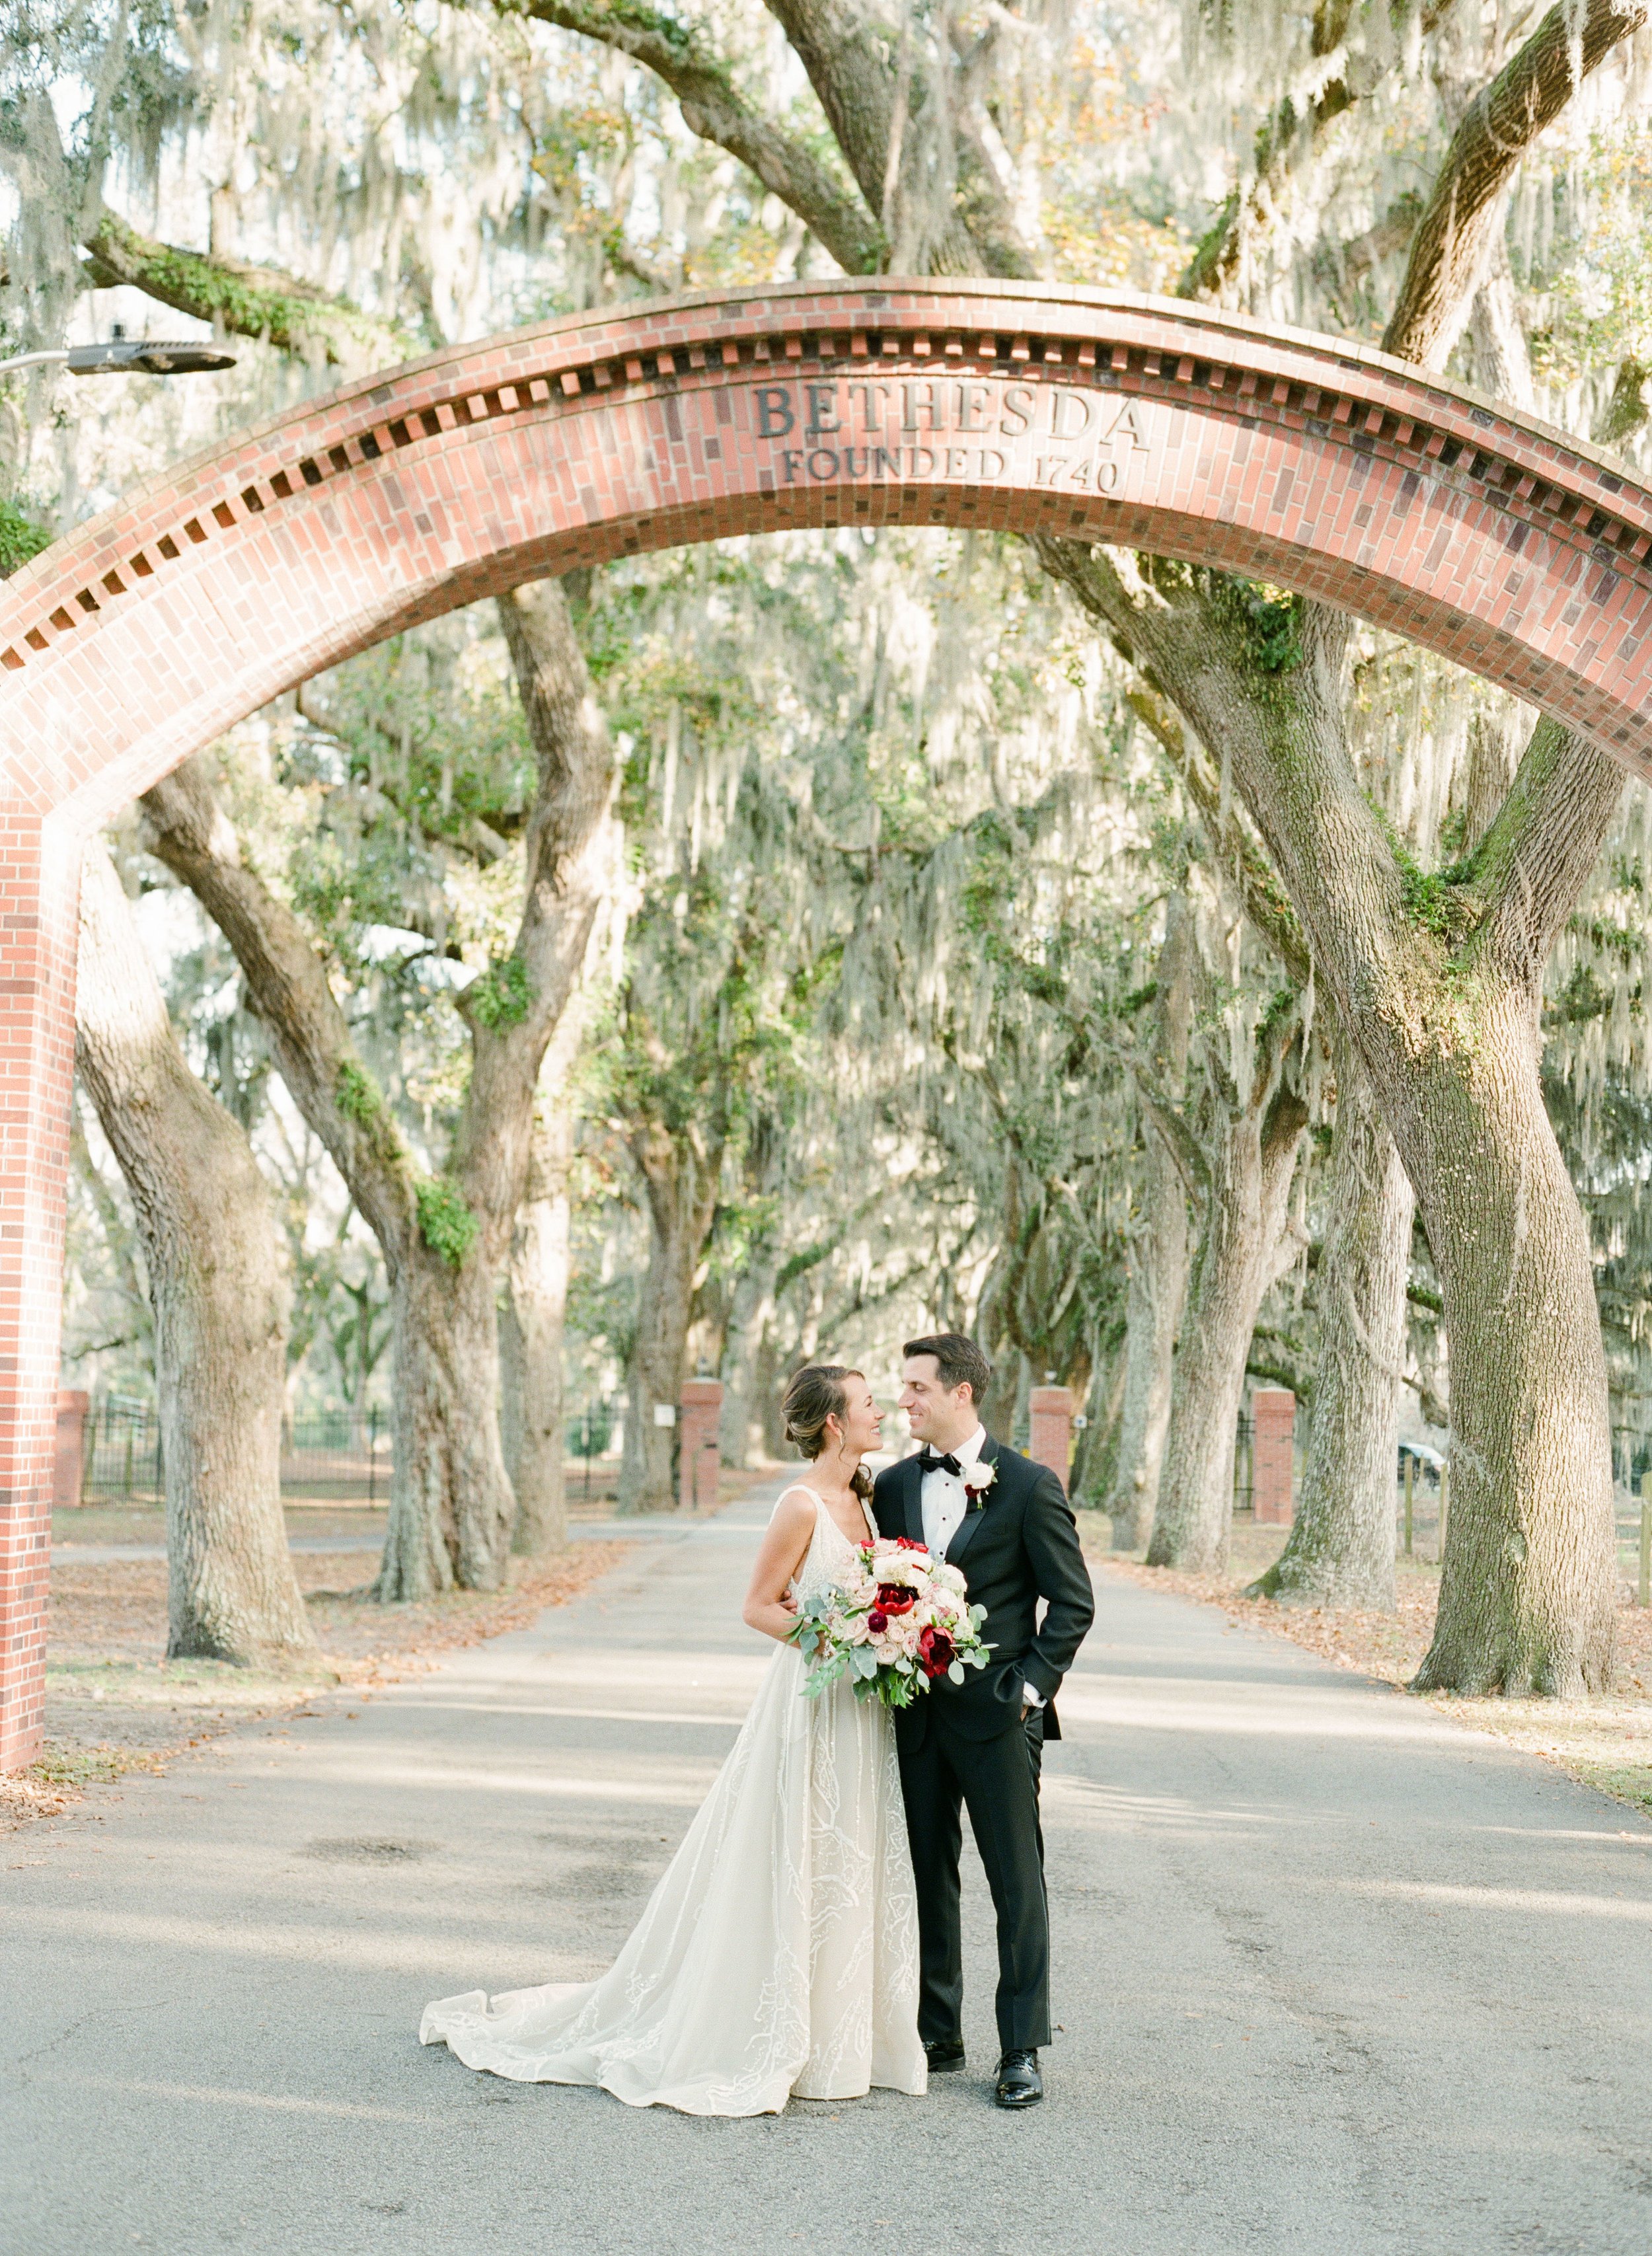 ivory-and-beau-bridal-boutique-savannah-wedding-planner-the-happy-bloom-photography-bethesda-academy-wedding-morris-center-wedding-savannah-wedding-11.jpg